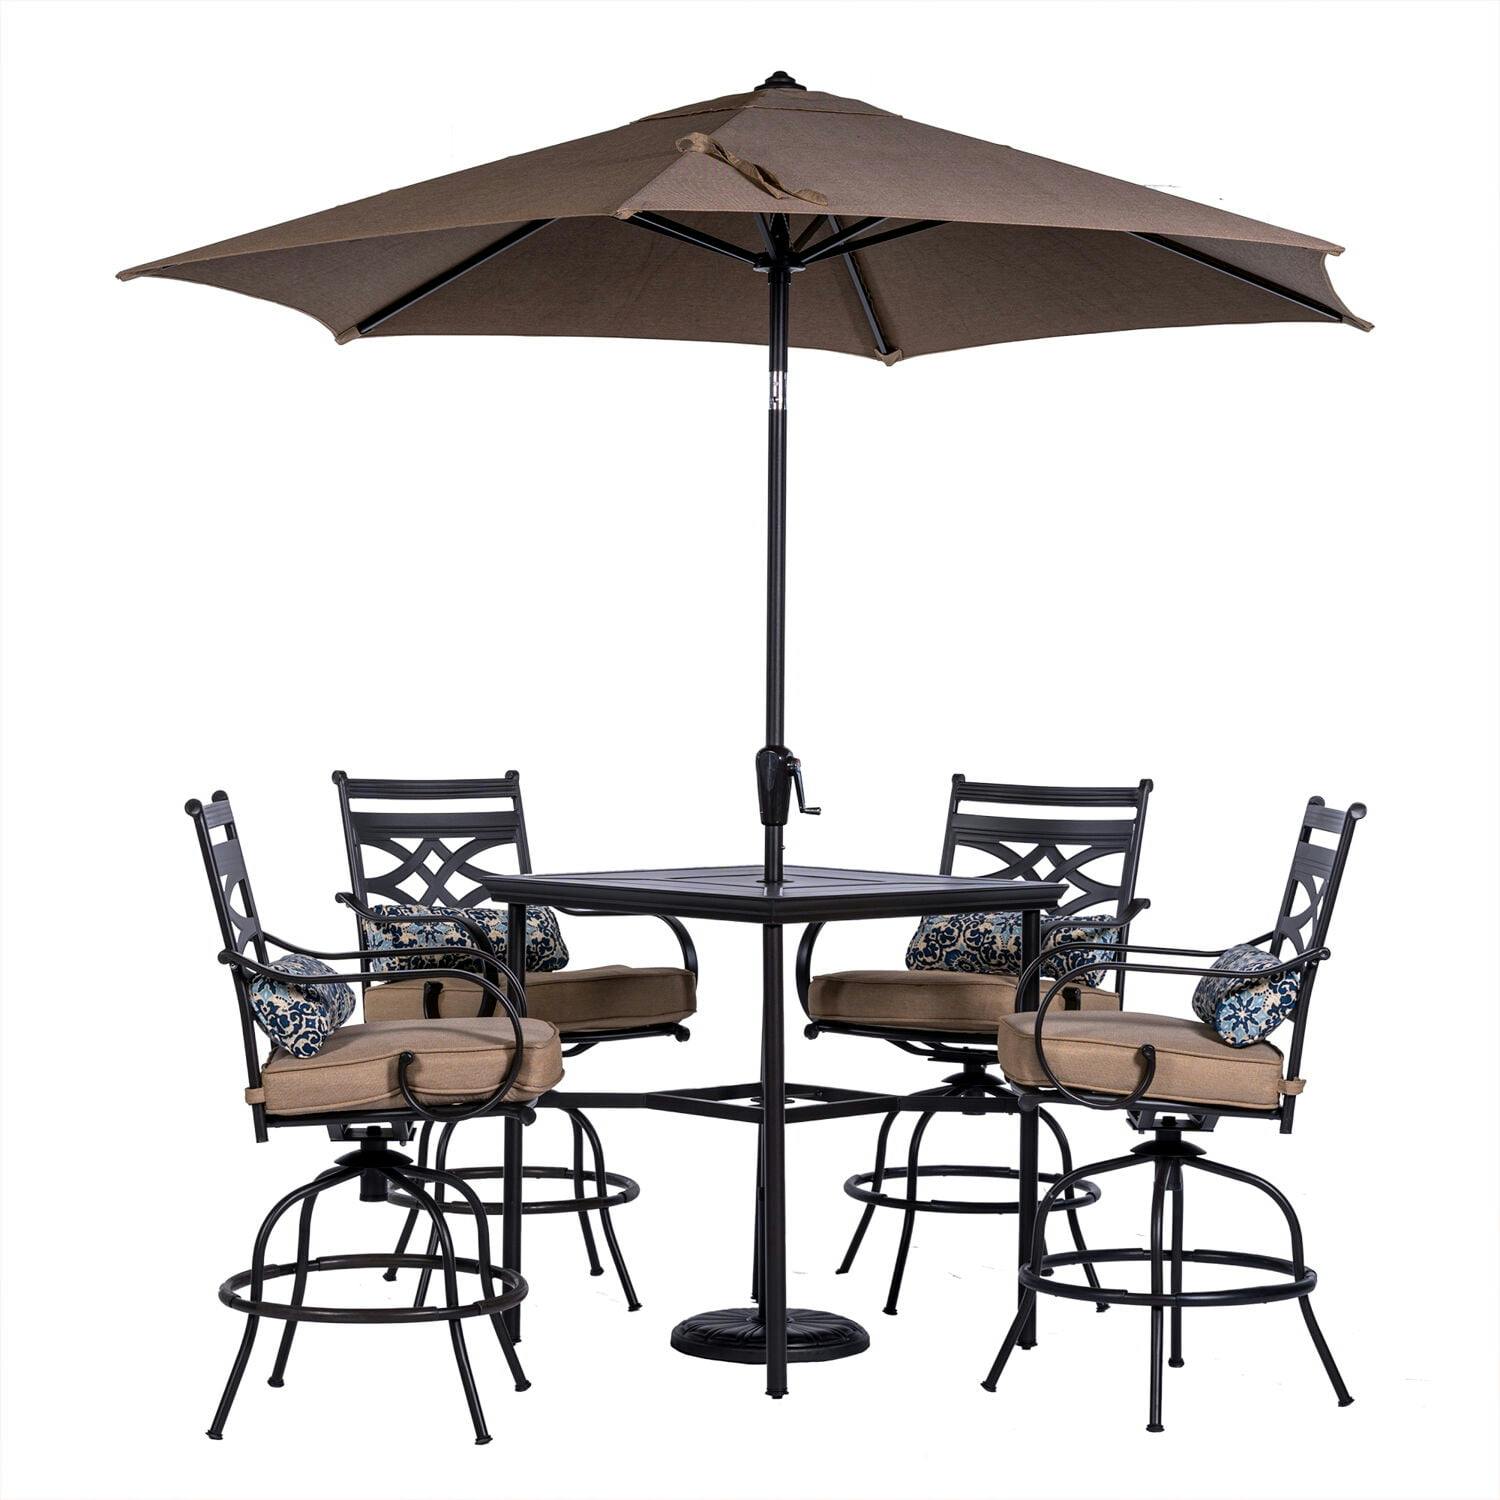 Montclair Modern 5-Piece Outdoor High-Dining Set with Swivel Chairs and Umbrella in Tan